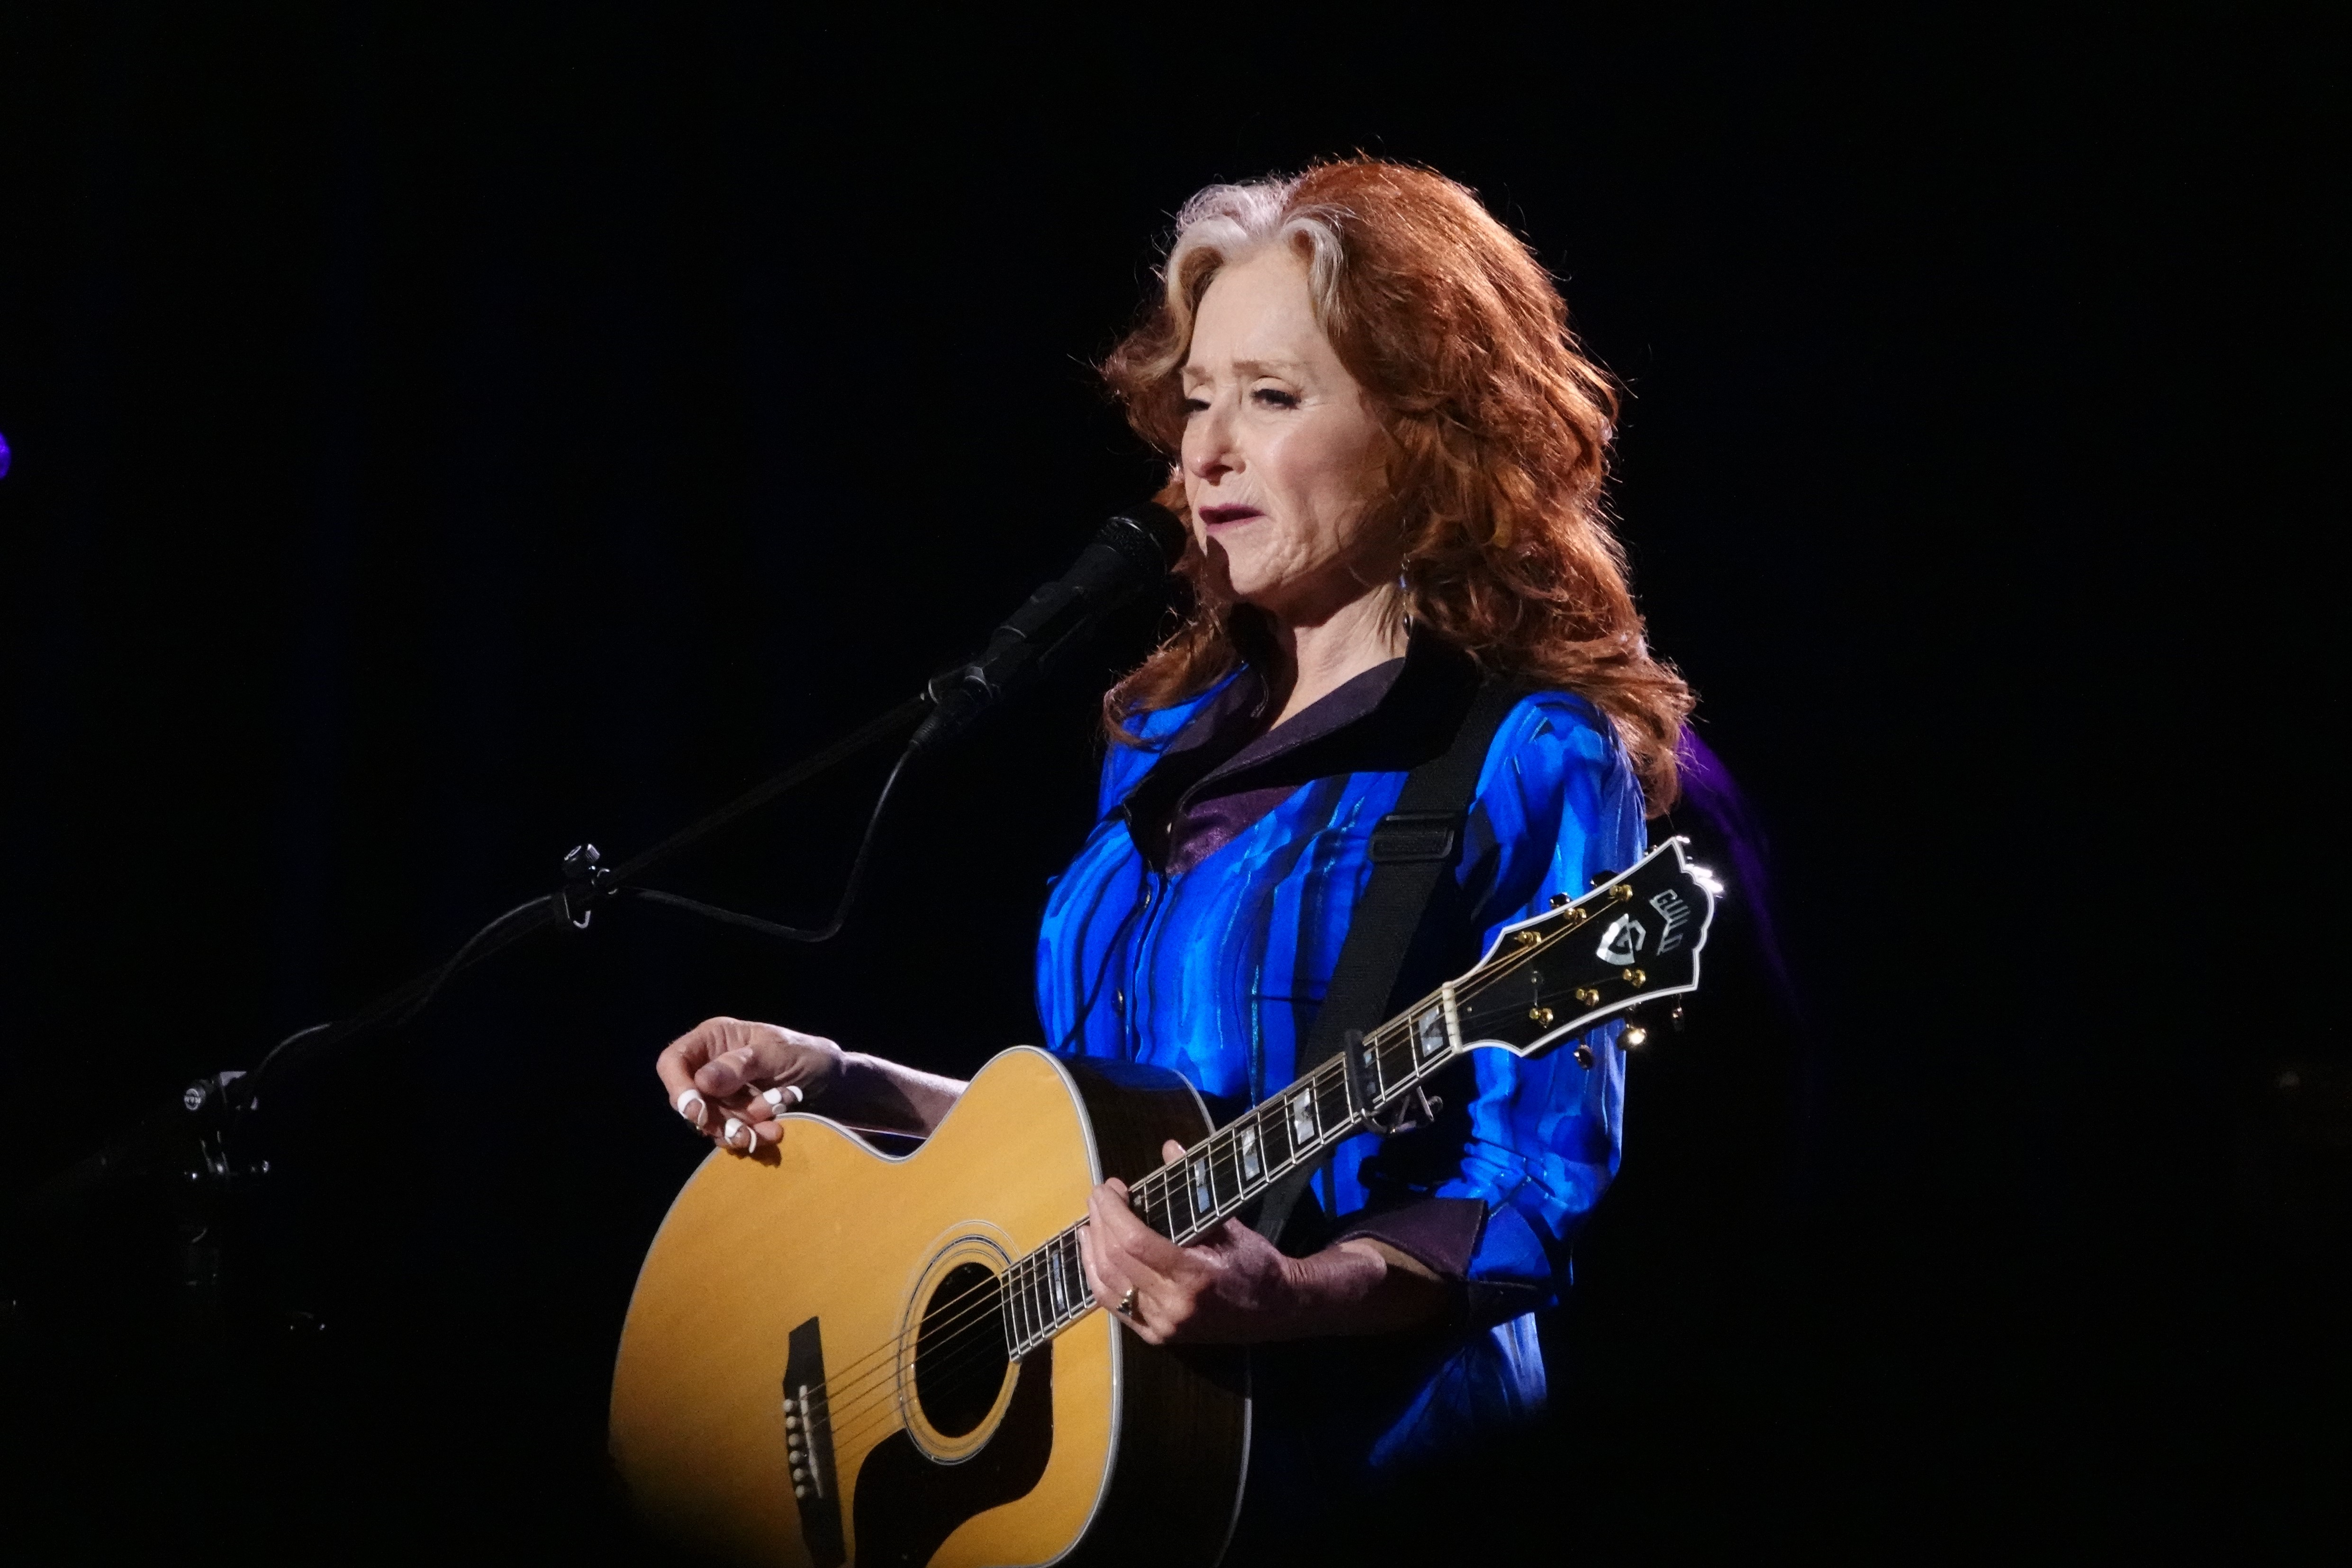 BONNIE RAITT RELEASES HER CAPITOL RECORDS MUSIC VIDEO CATALOG REMASTERED FOR HD